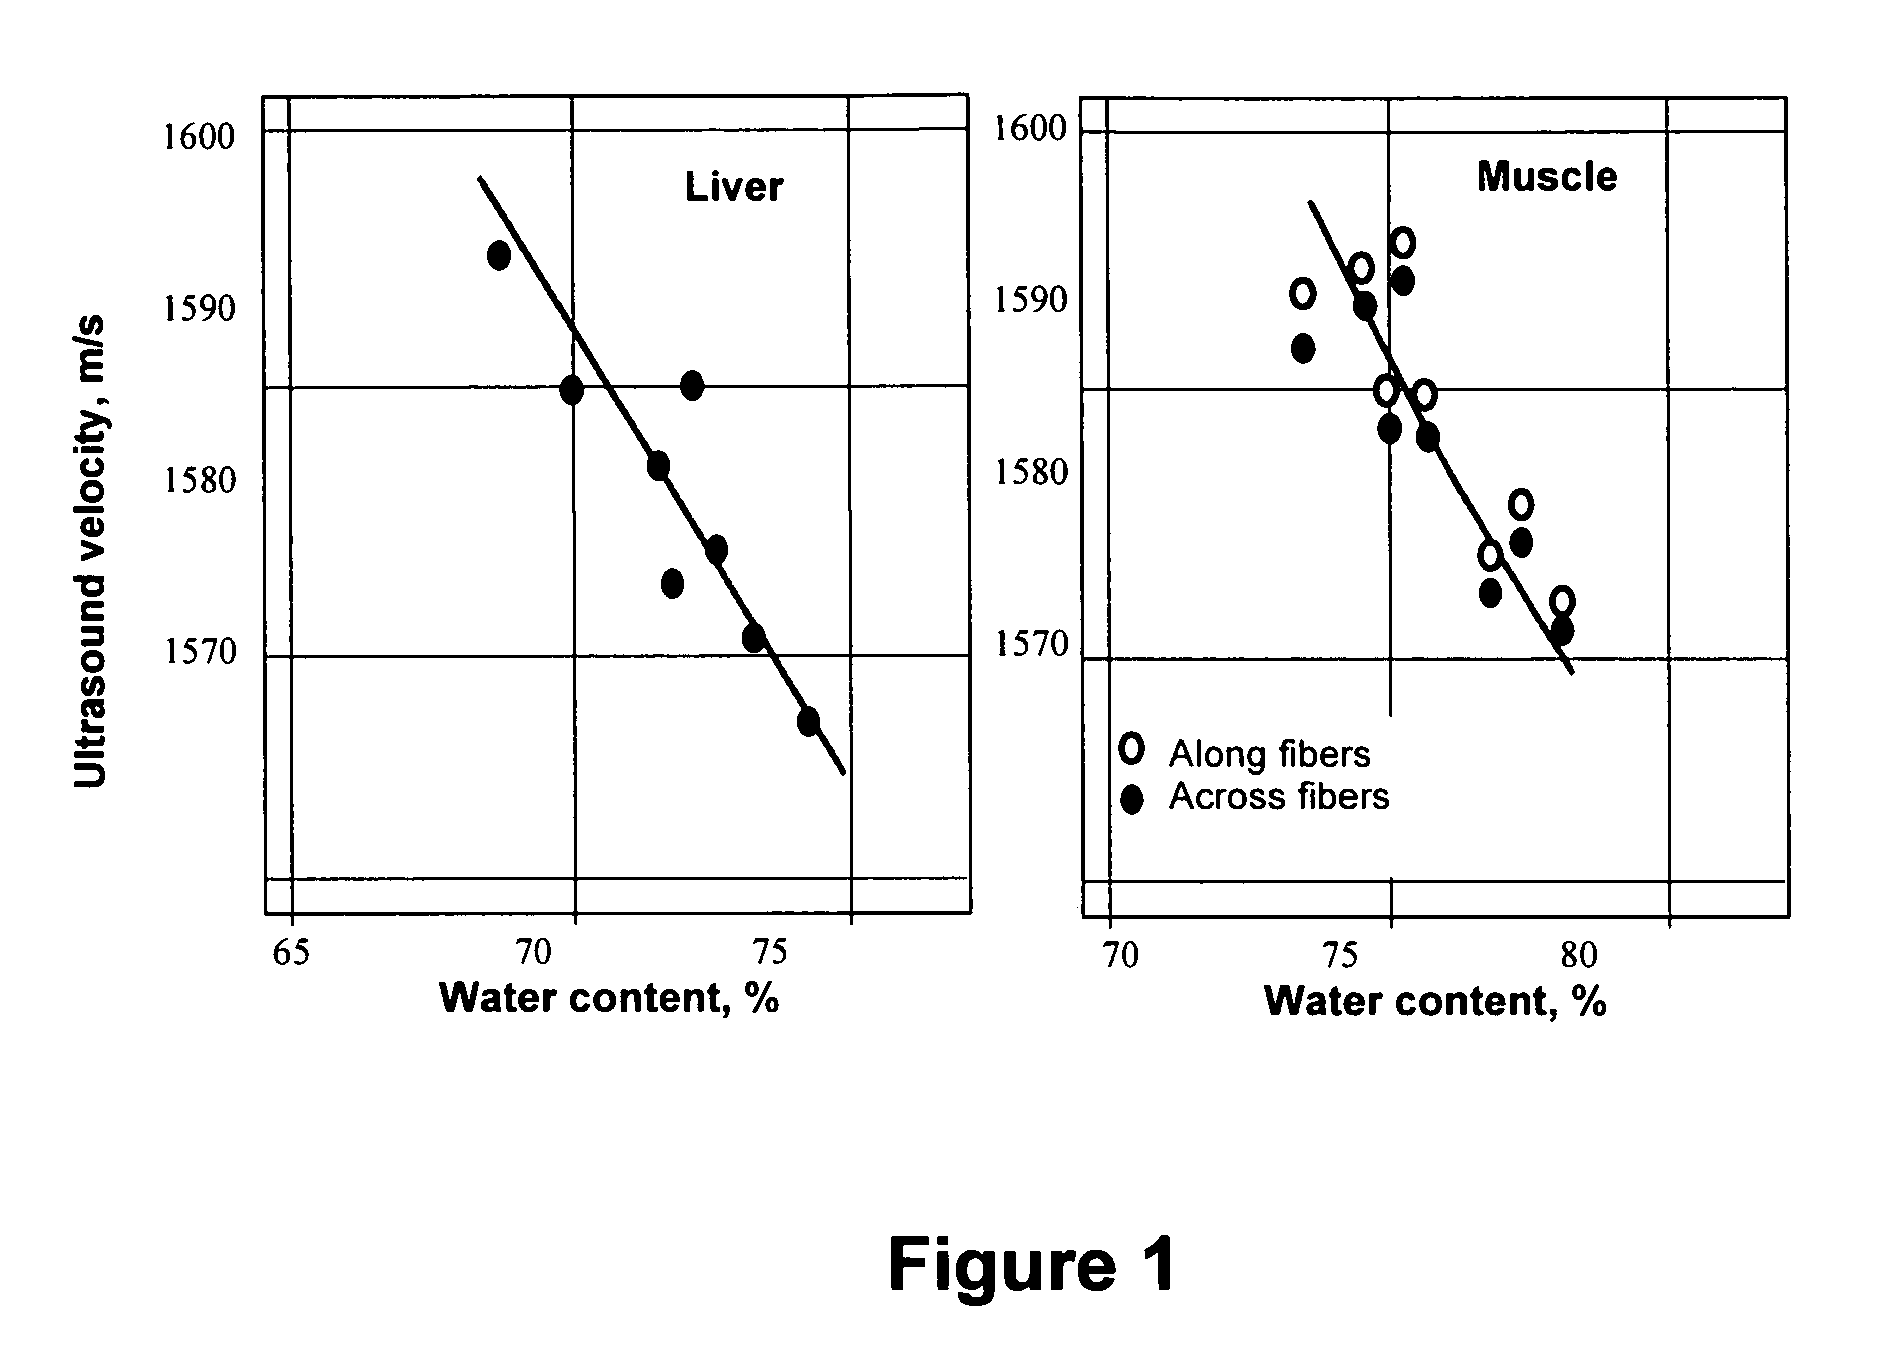 Ultrasonic water content monitor and methods for monitoring tissue hydration